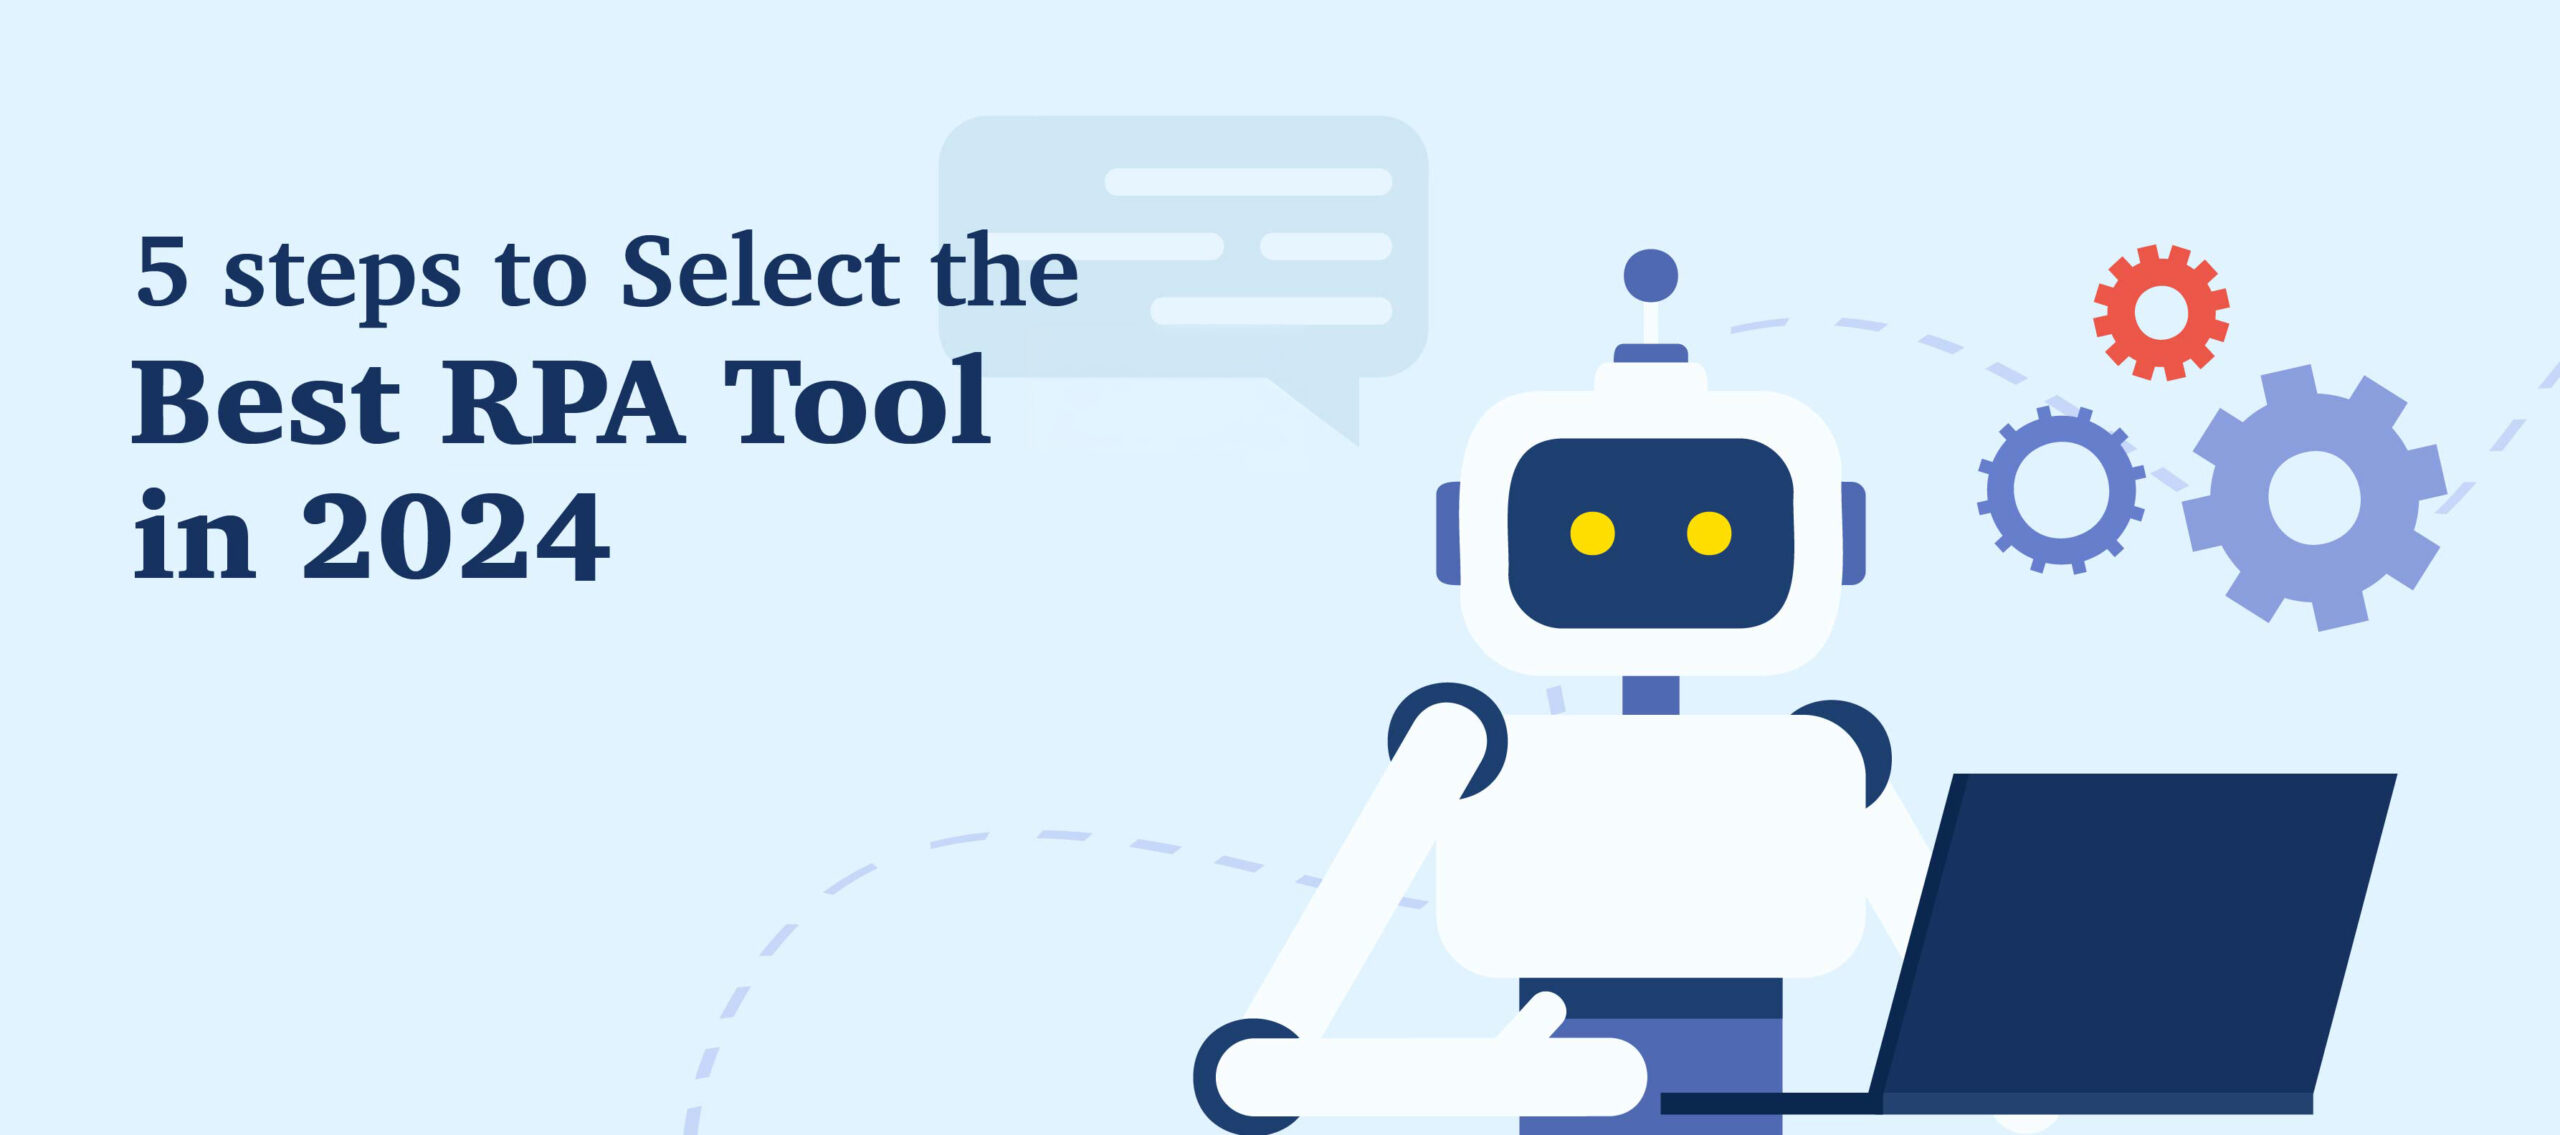 5 Steps to Select the Best RPA Tool in 2024 | TFT